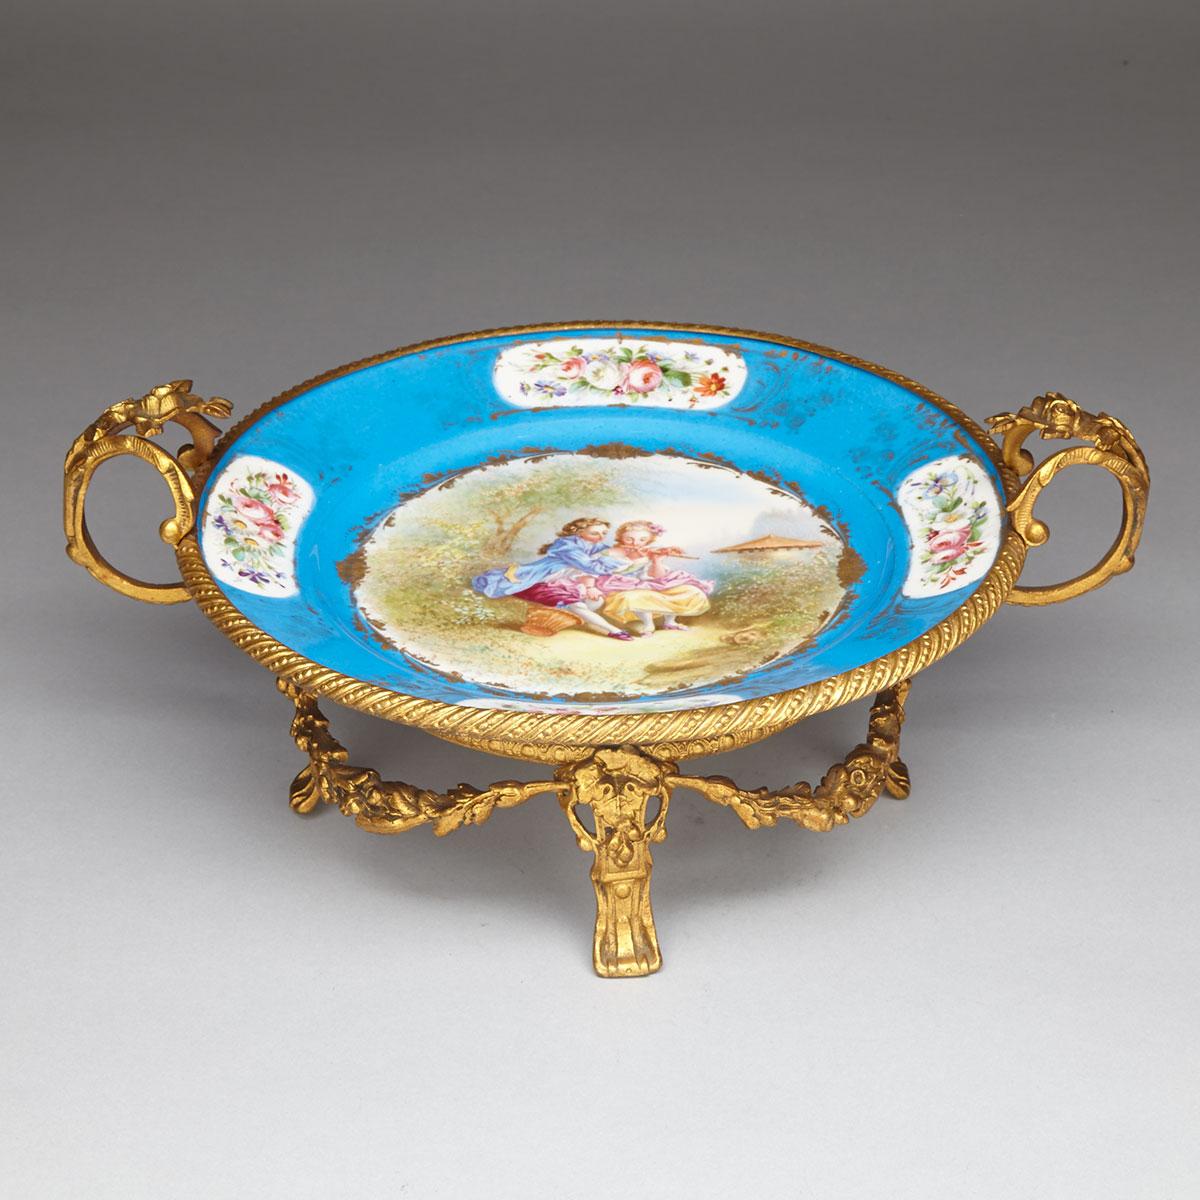 Ormolu Mounted Sevres Style Porcelain Plate on Stand, 19th century